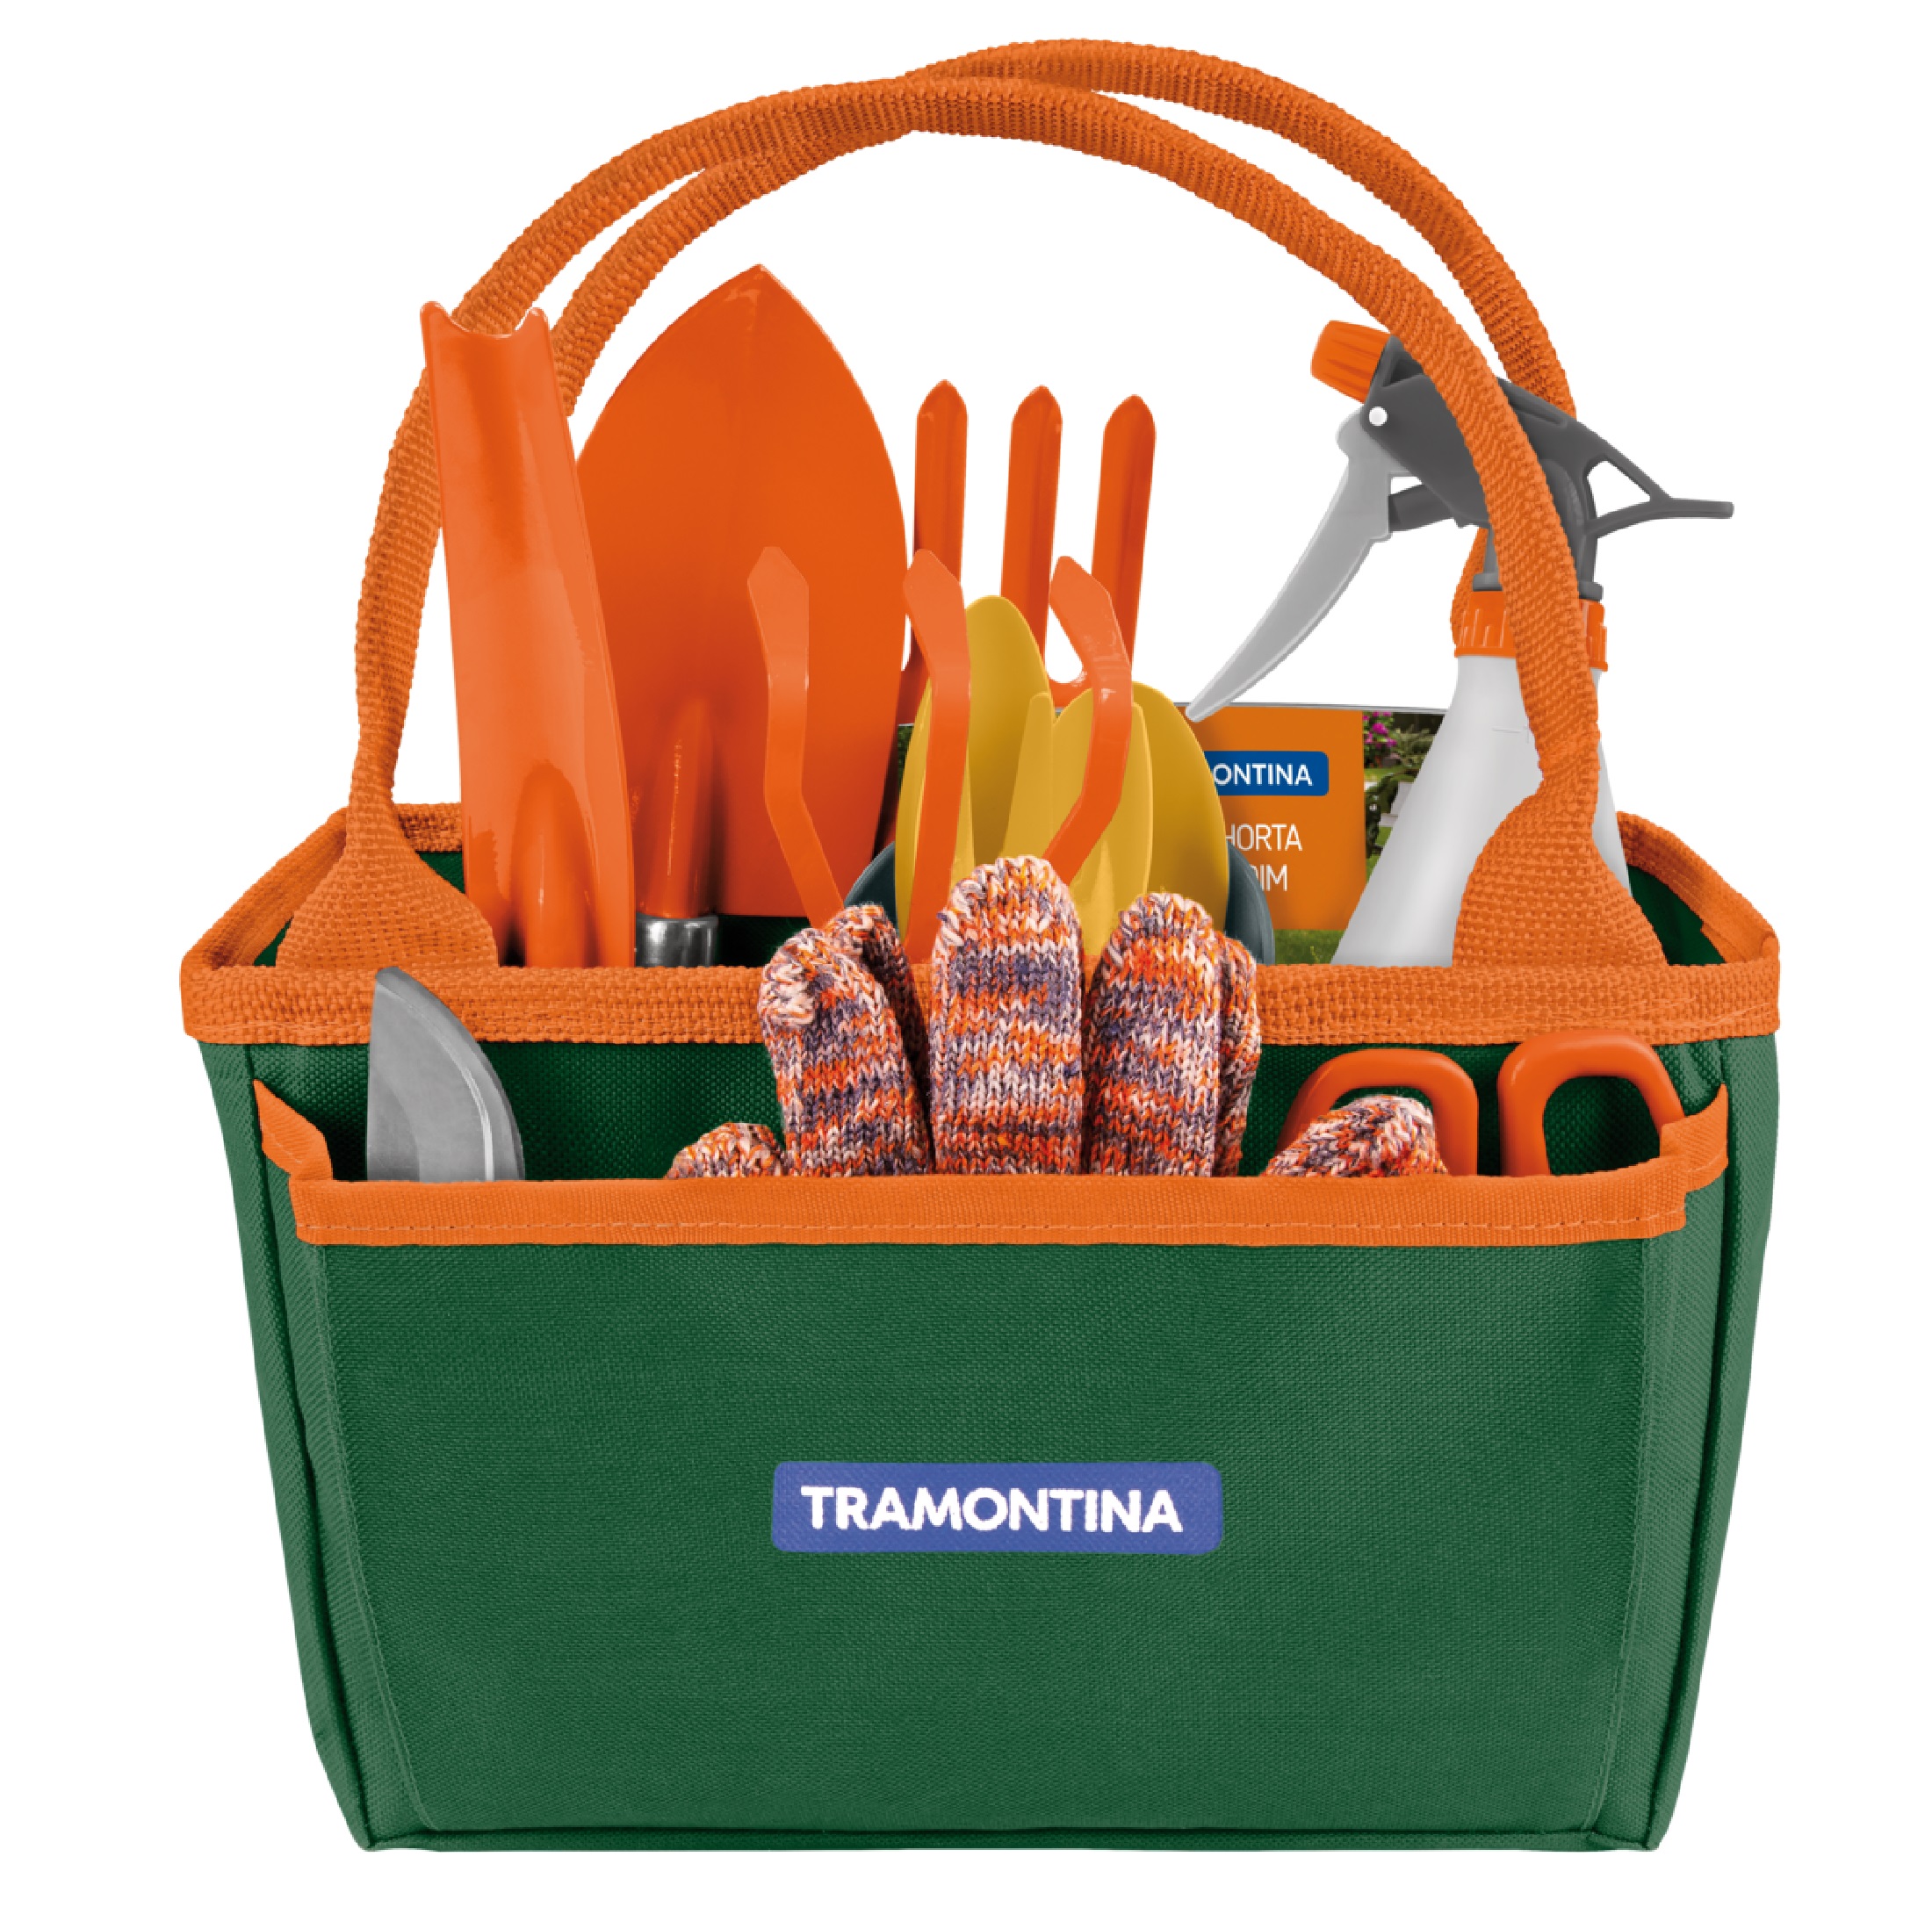 Tramontina 13PC Special Gift Gardening Tool Set Comes With Printed Gift Box